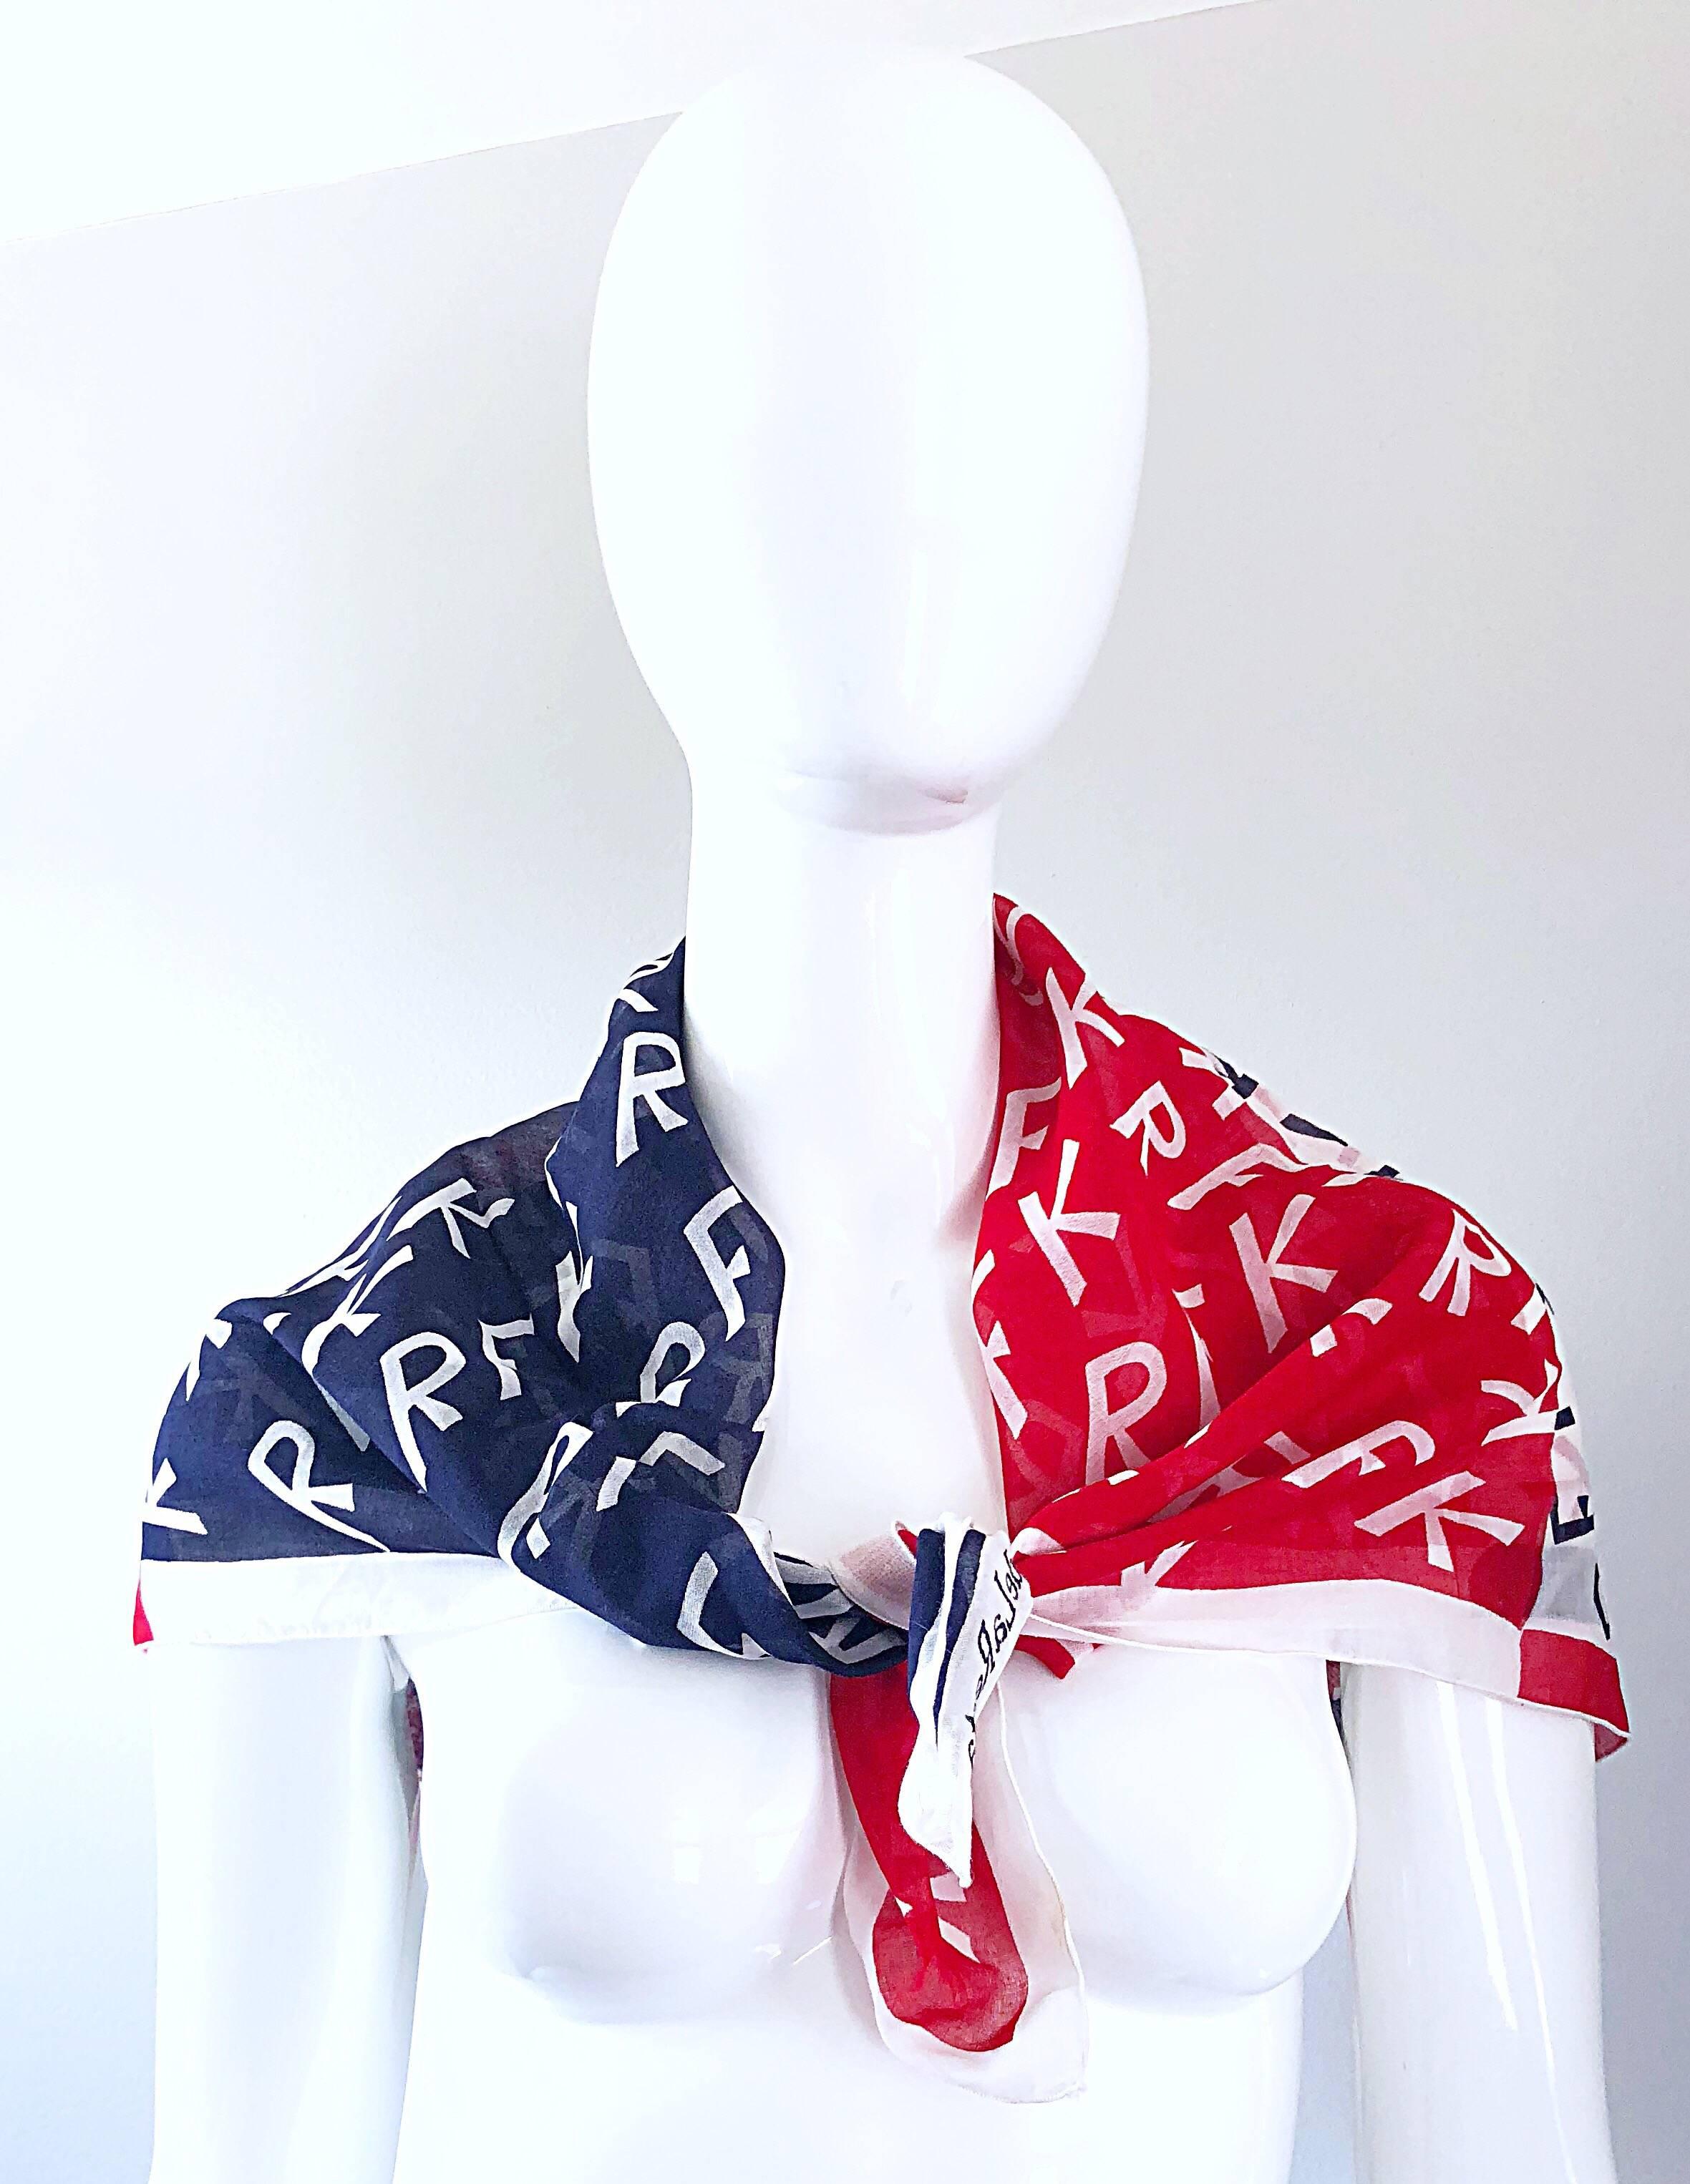 Rare vintage 1960s OSCAR DE LA RENTA 
Robert ( Bobby ) F. Kennedy Presidential Campaign cotton voile red, white and blue lightweight cotton voile large shawl / scarf! Perfect for Memorial Day, July 4th, or ANY day! A historical museum worthy piece